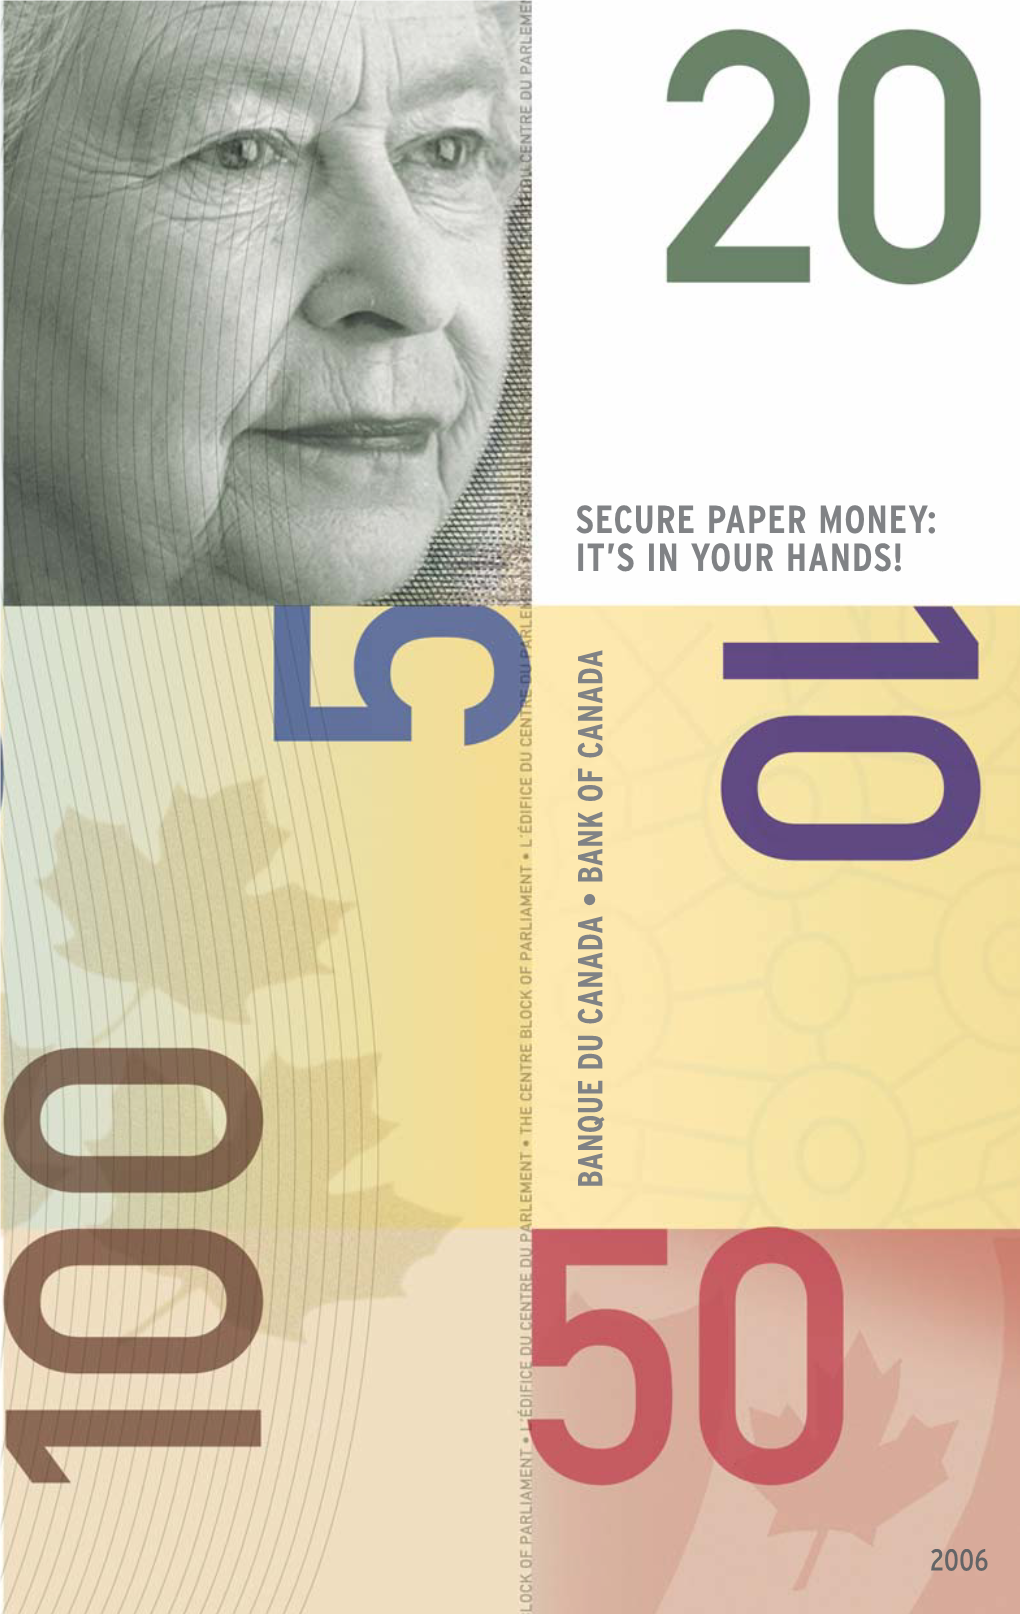 Secure Paper Money: It's in Your Hands!